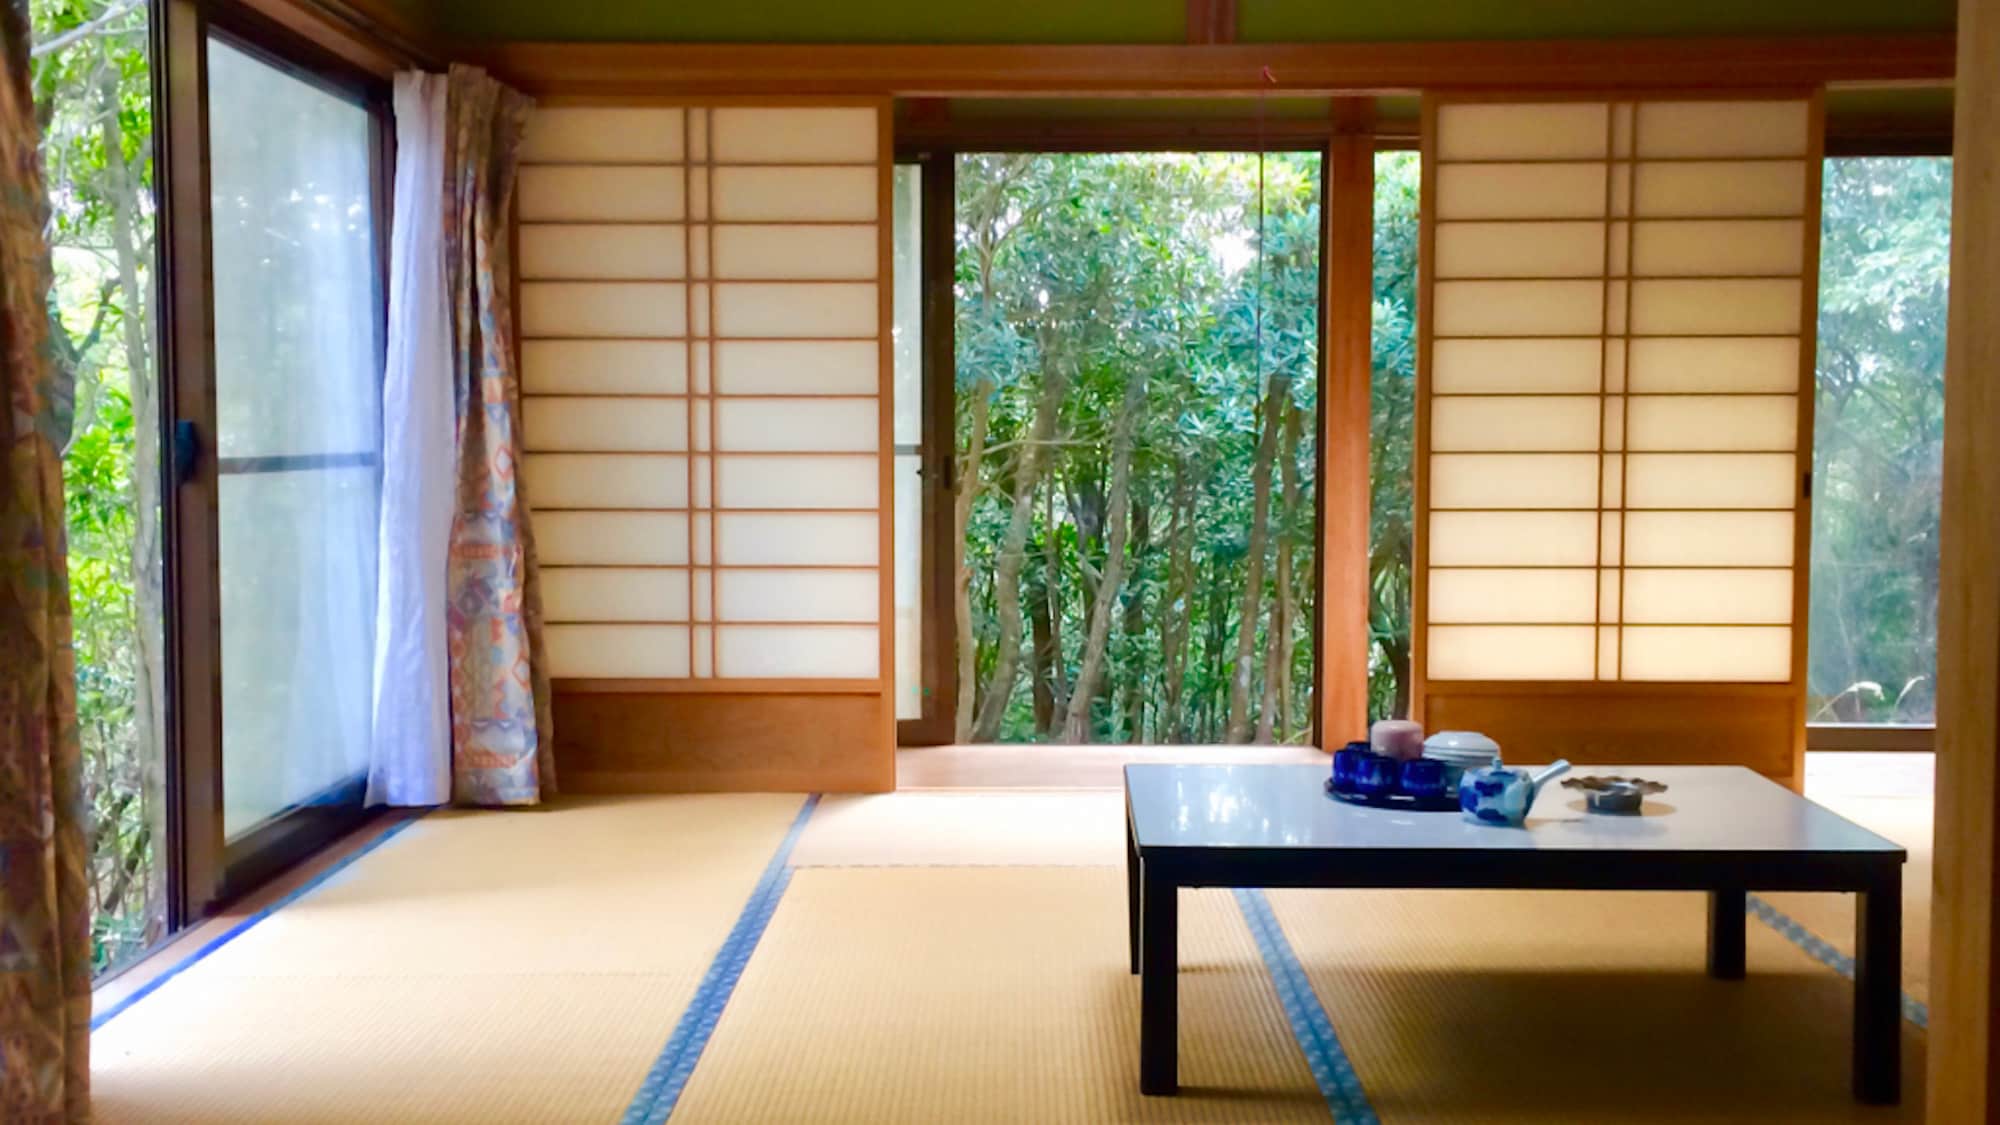 ・[Building 5/Japanese-style room] Surrounded by trees, you will feel like you are living in a forest. A Japanese-style room where you can stretch your legs and relax.